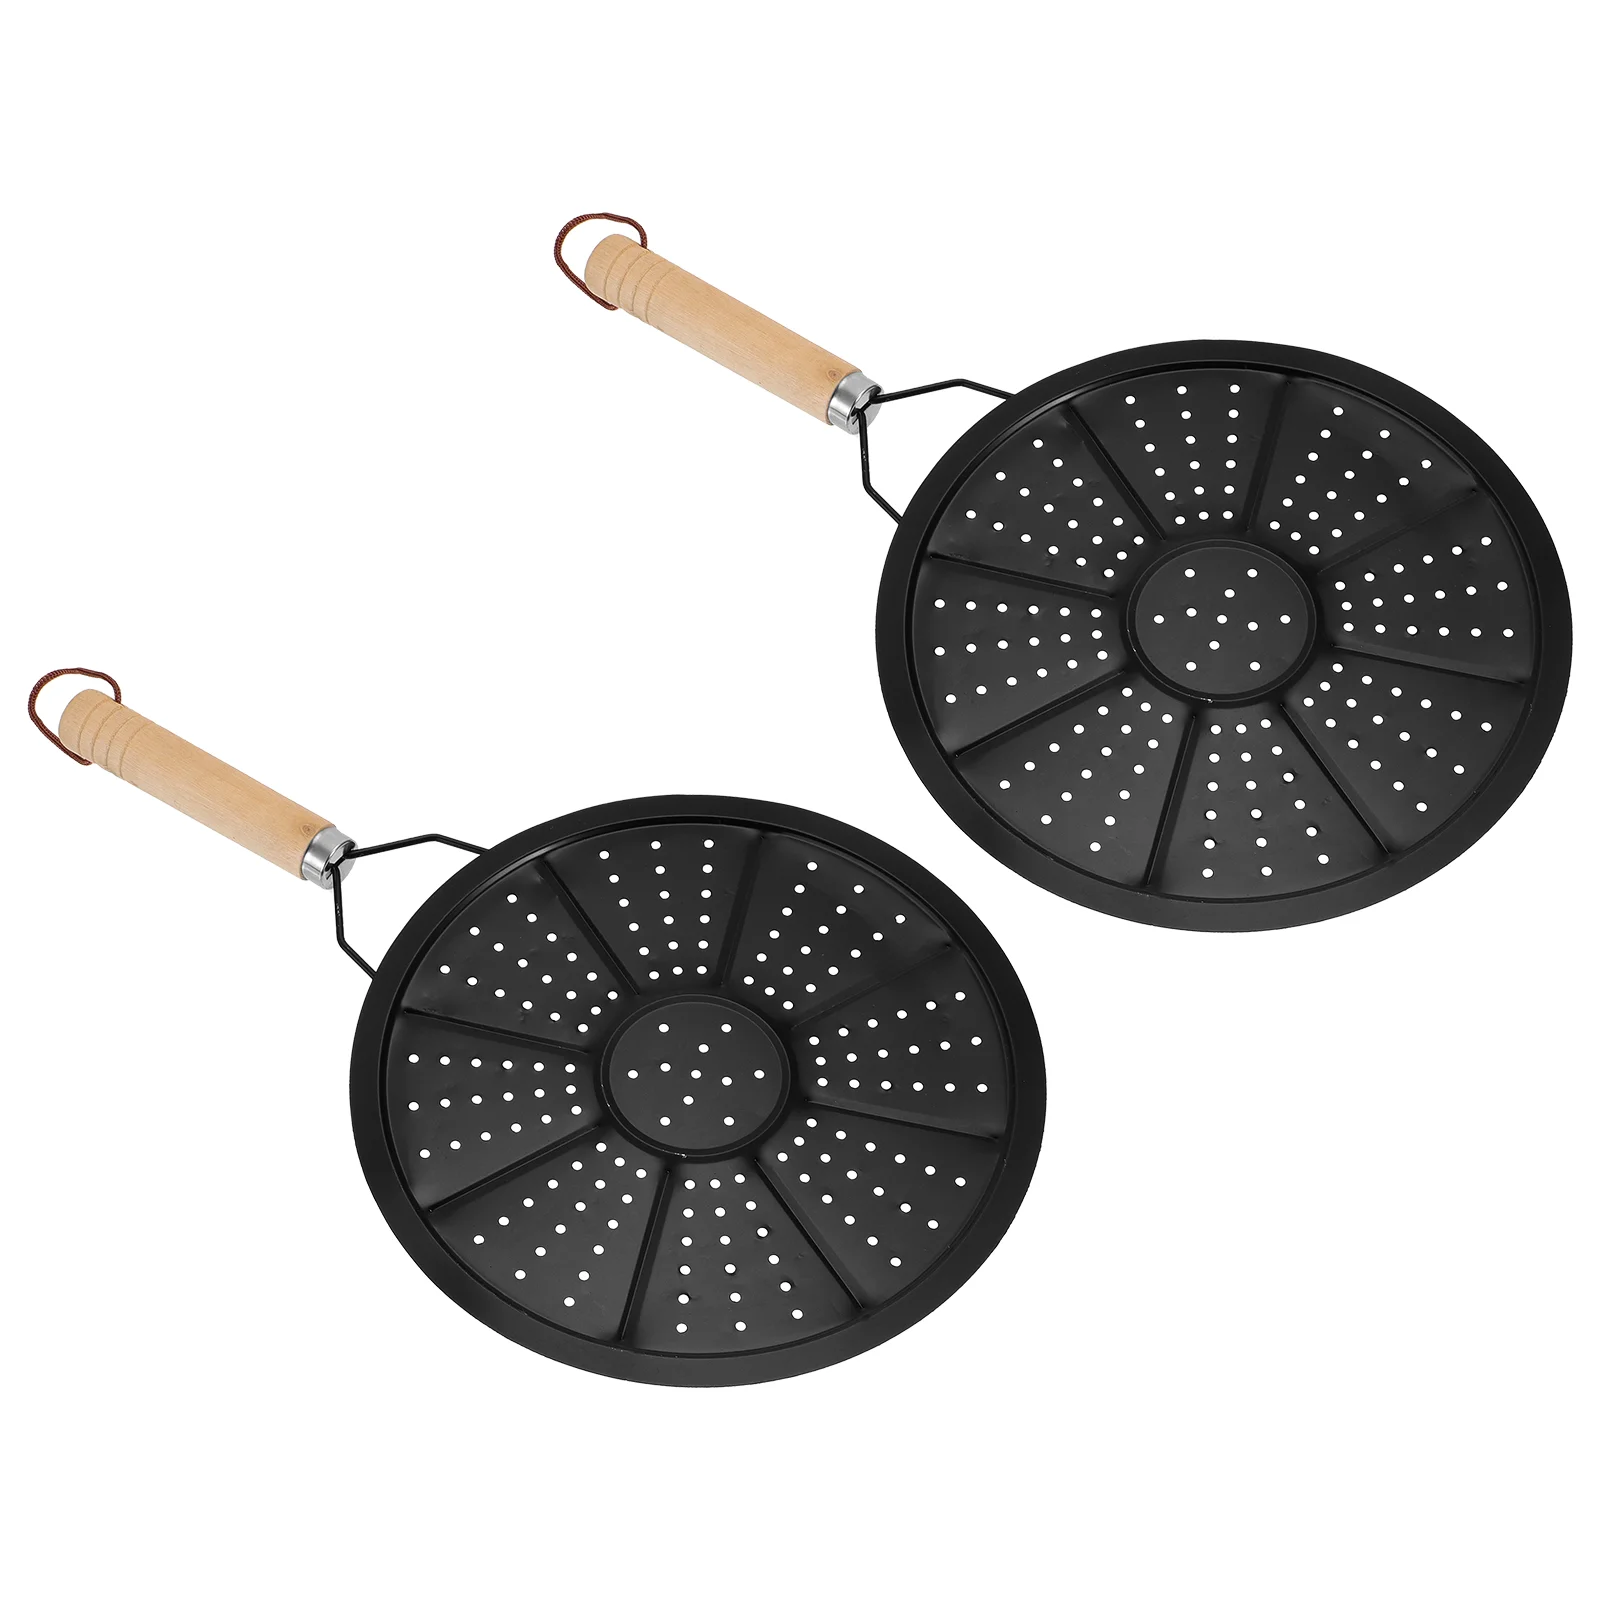 

Diffuser Heat Plate Insulation Pad Pot Induction Hot Coffee Ring Mat Trivets Trivet Reducer Stove Pads Kitchen Handle Pan Home